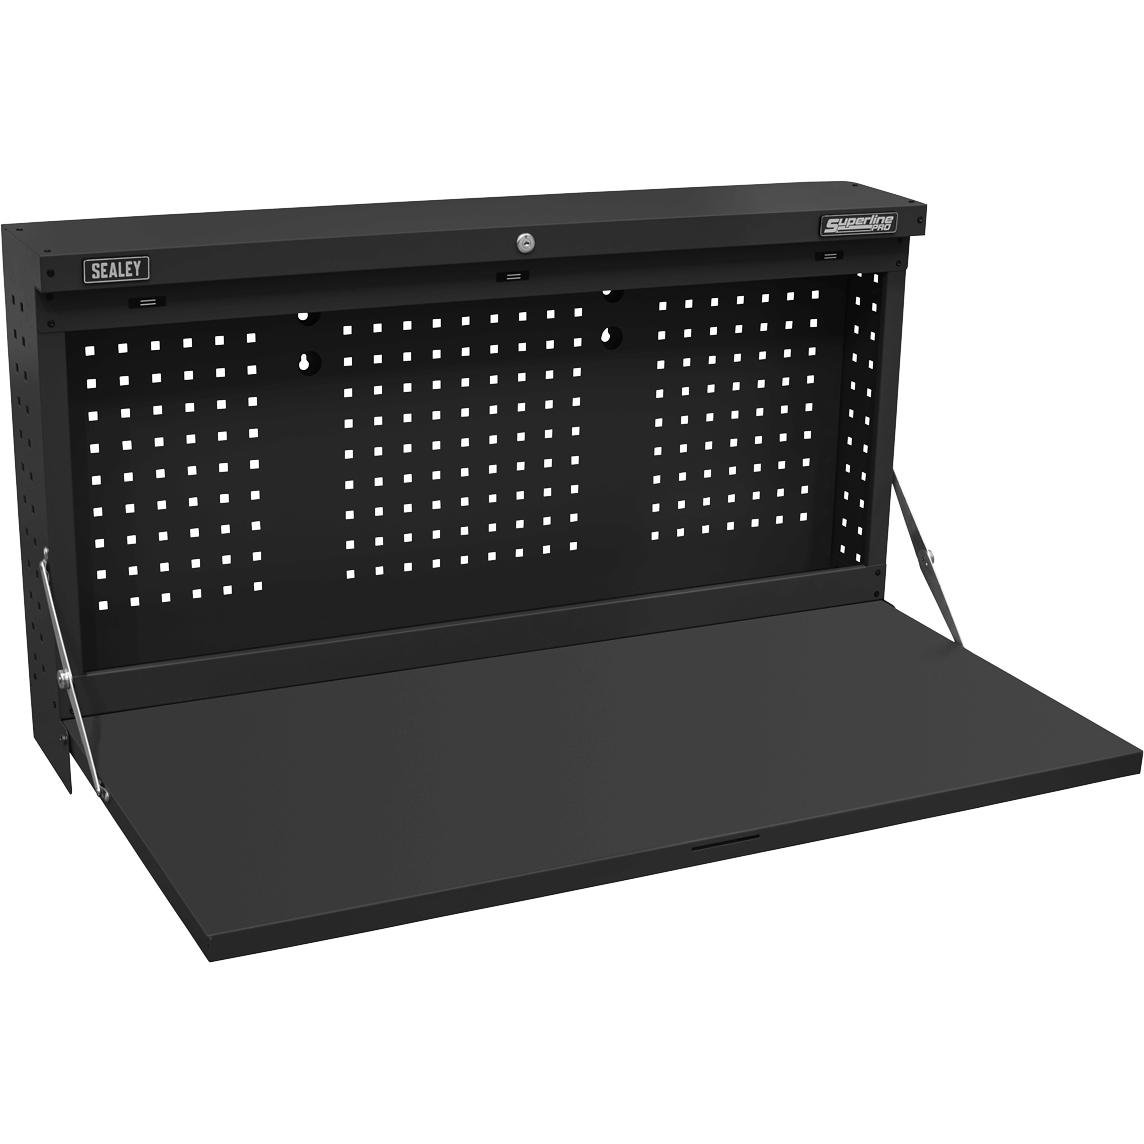 Sealey Wall Mount Fold Down Metal Workbench and Pegboard 1.1m